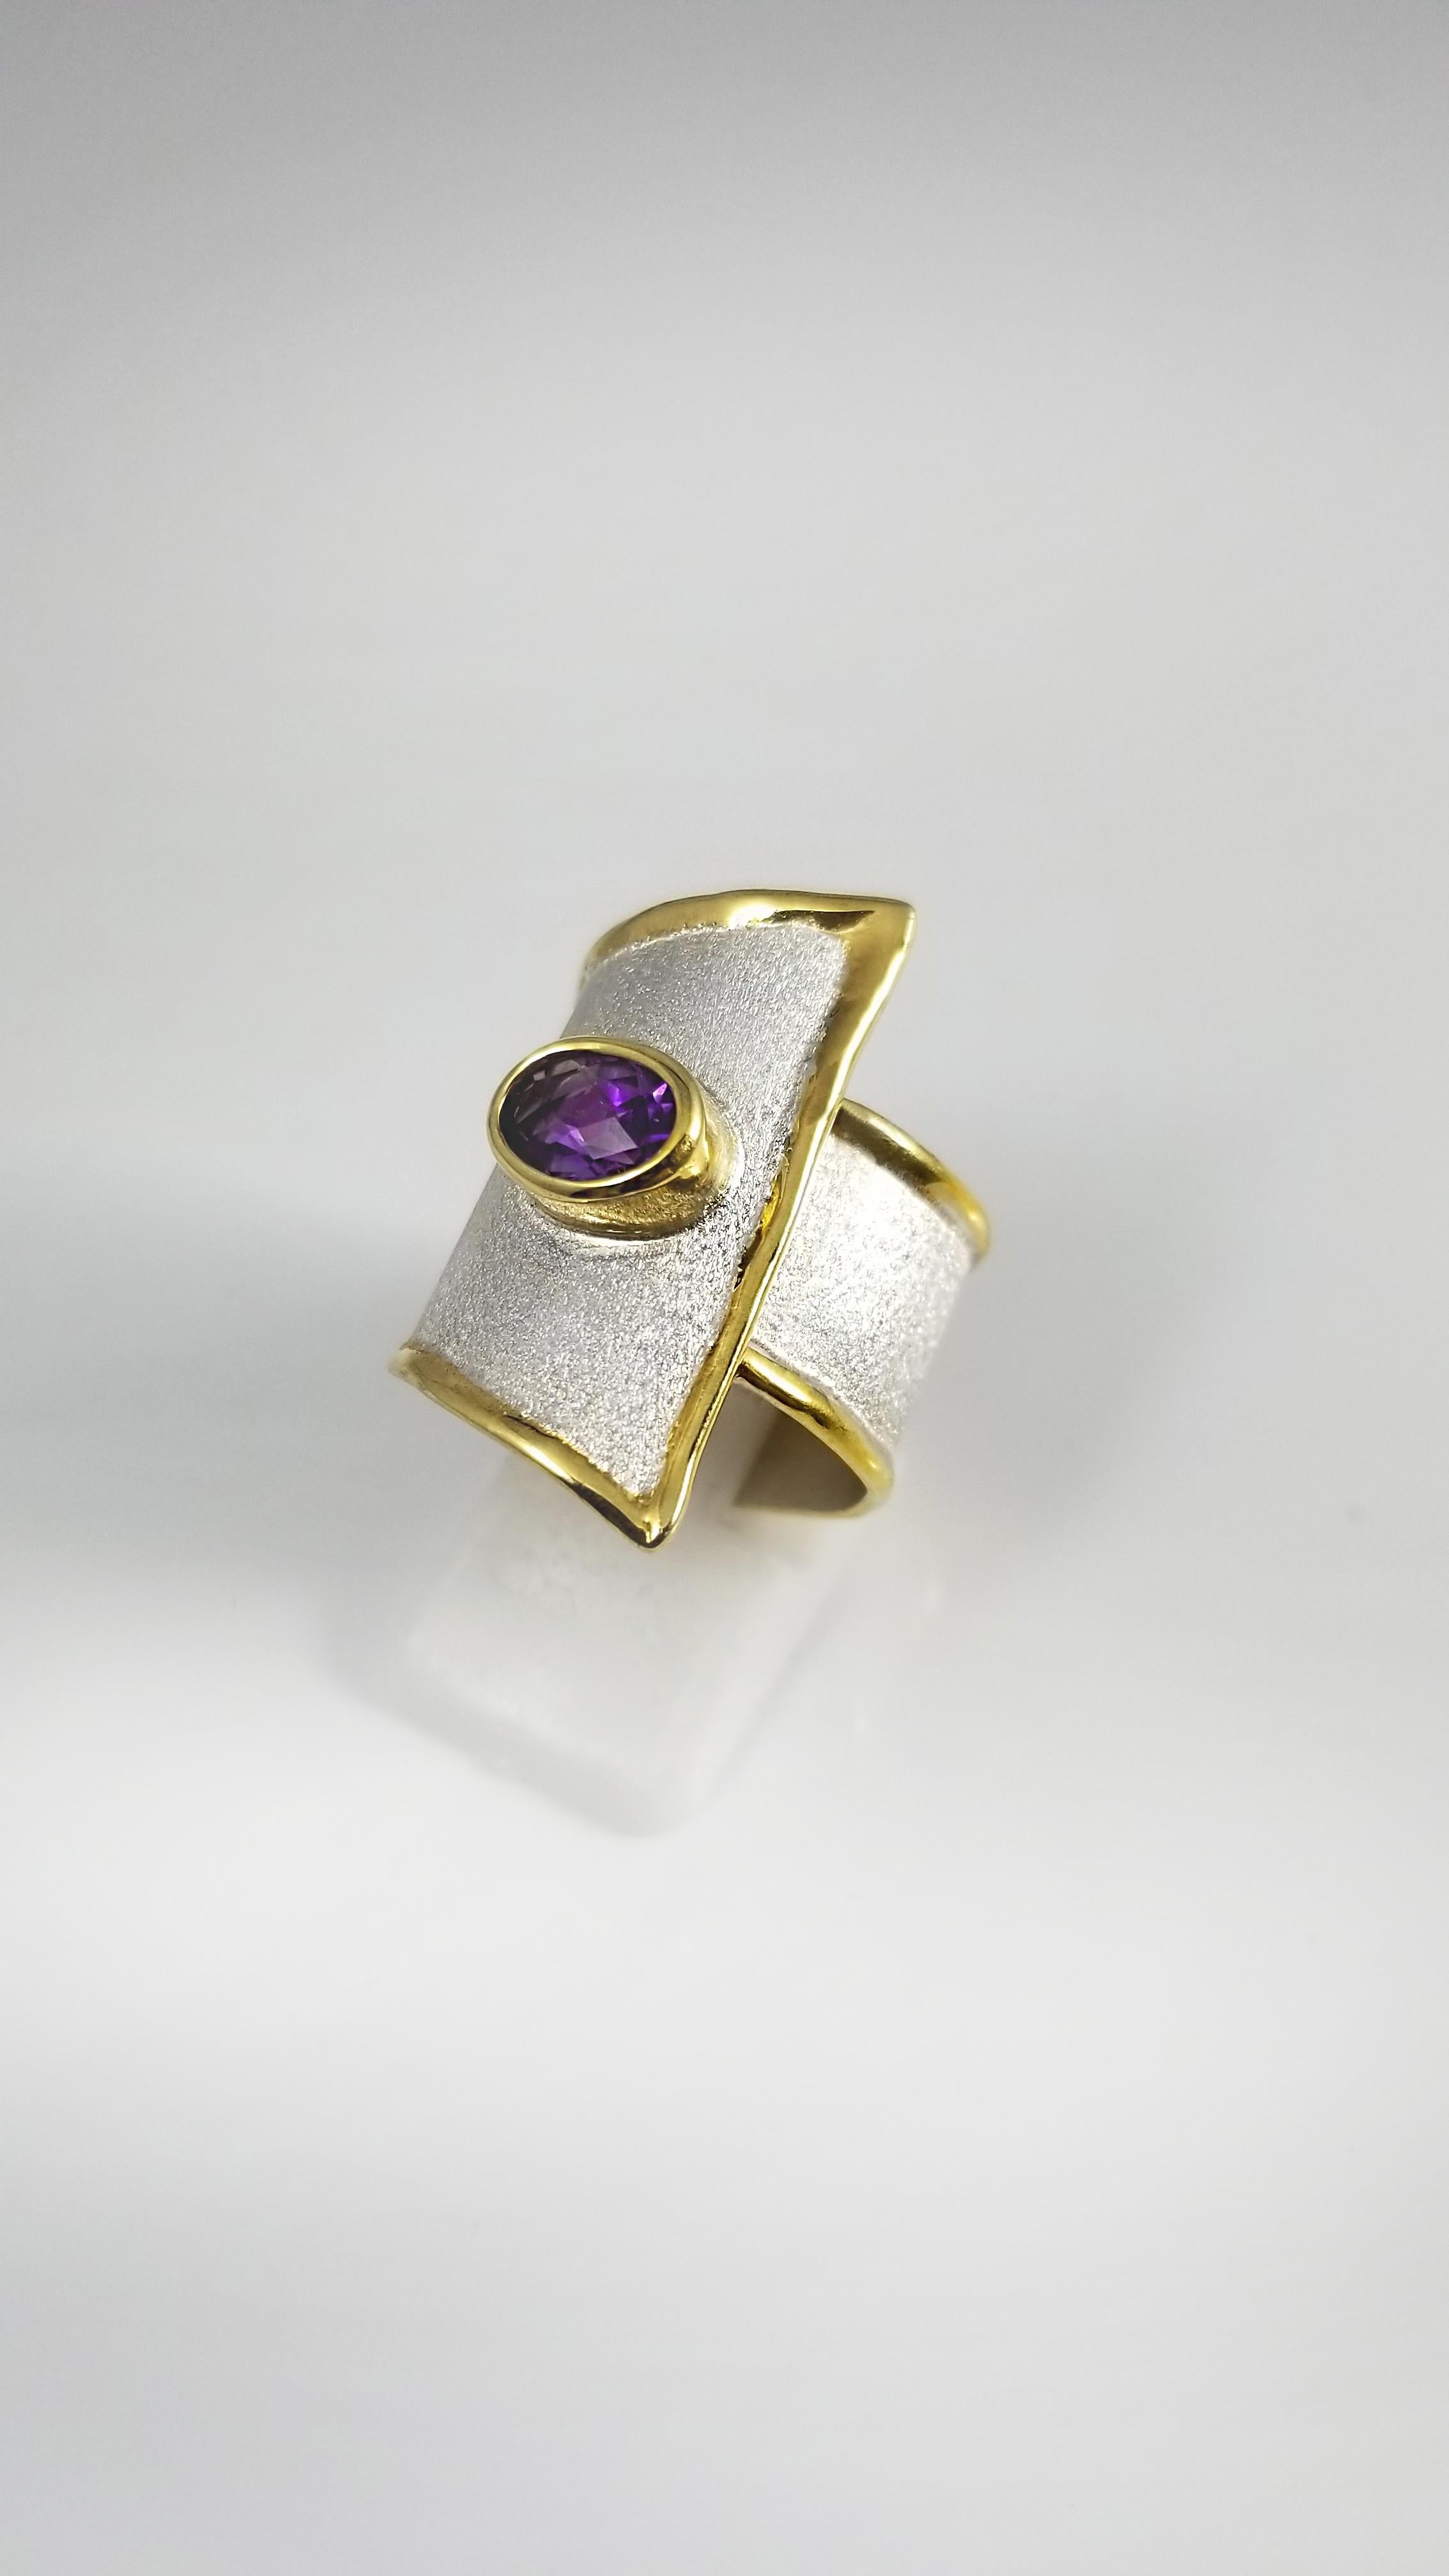 This handmade fine silver Statement Ring features a 1.25 Carat Amethyst. Inspired by the geometric era, this design is the Largest one of its family. The straight lines that this ring creates, frame and feature the stone, while it helps to make a